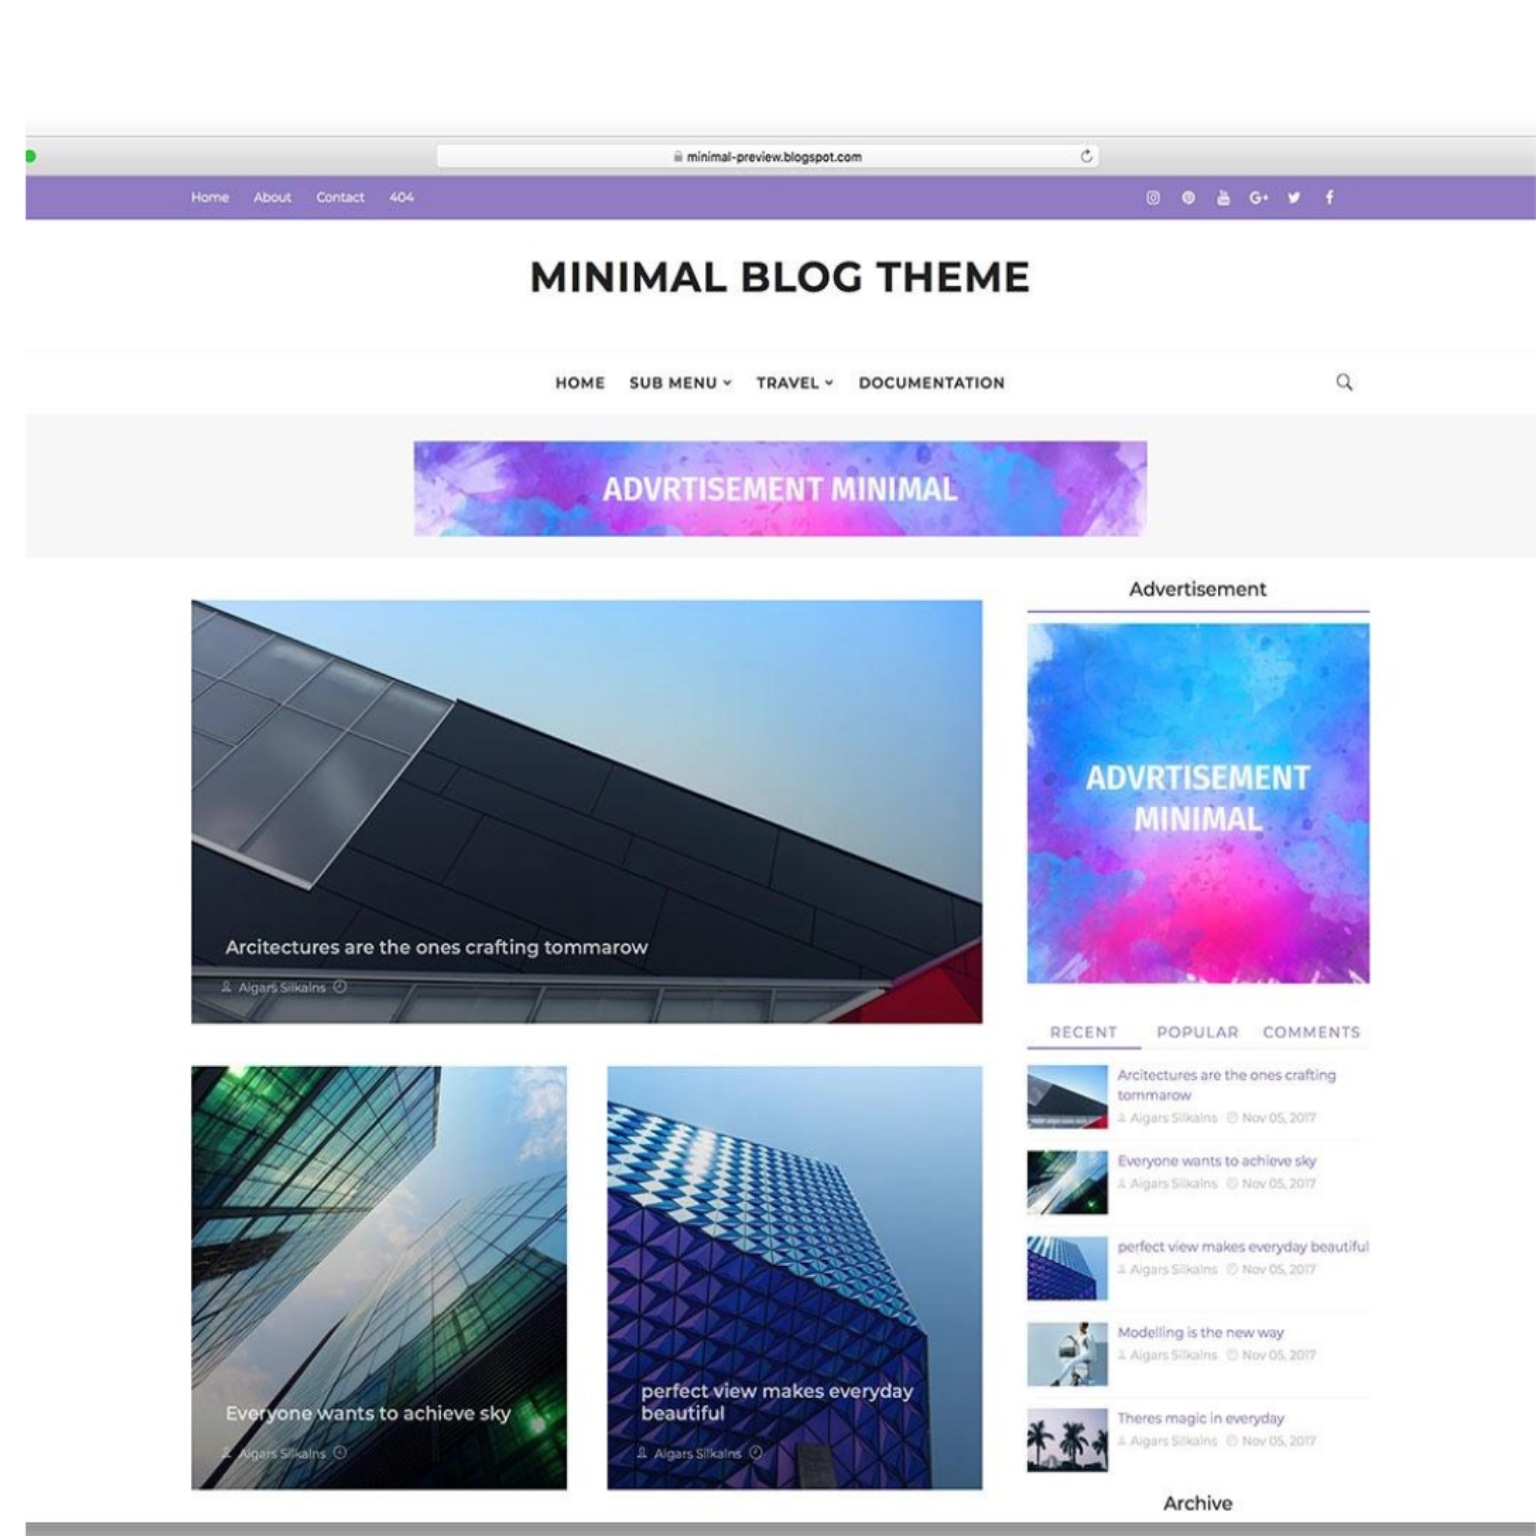 An image with an adorable WordPress template in colorful colors.